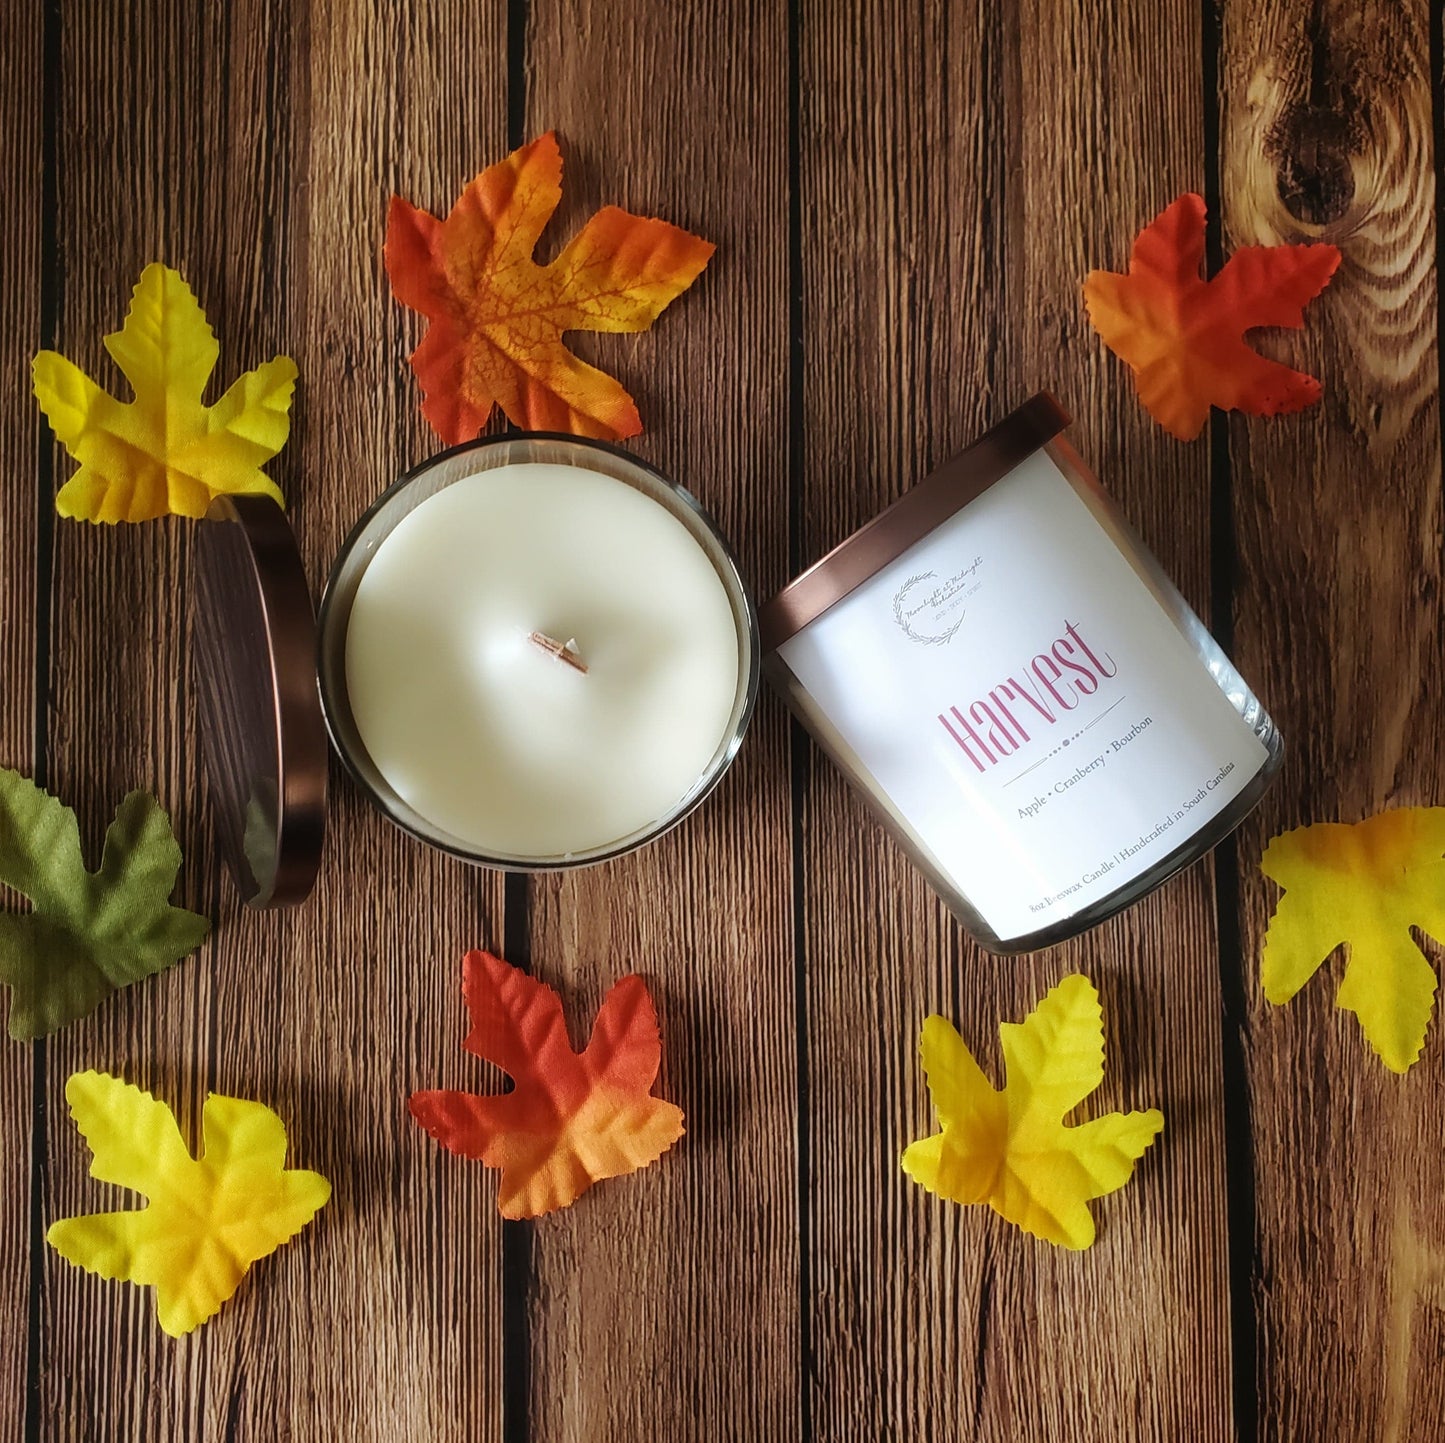 HARVEST | 8 oz Beeswax Wood Wick Candle | Aromatherapy | Tumbler Jar Candle | Handmade Apple Cinnamon Vanilla Scented Candle | Fall Candle